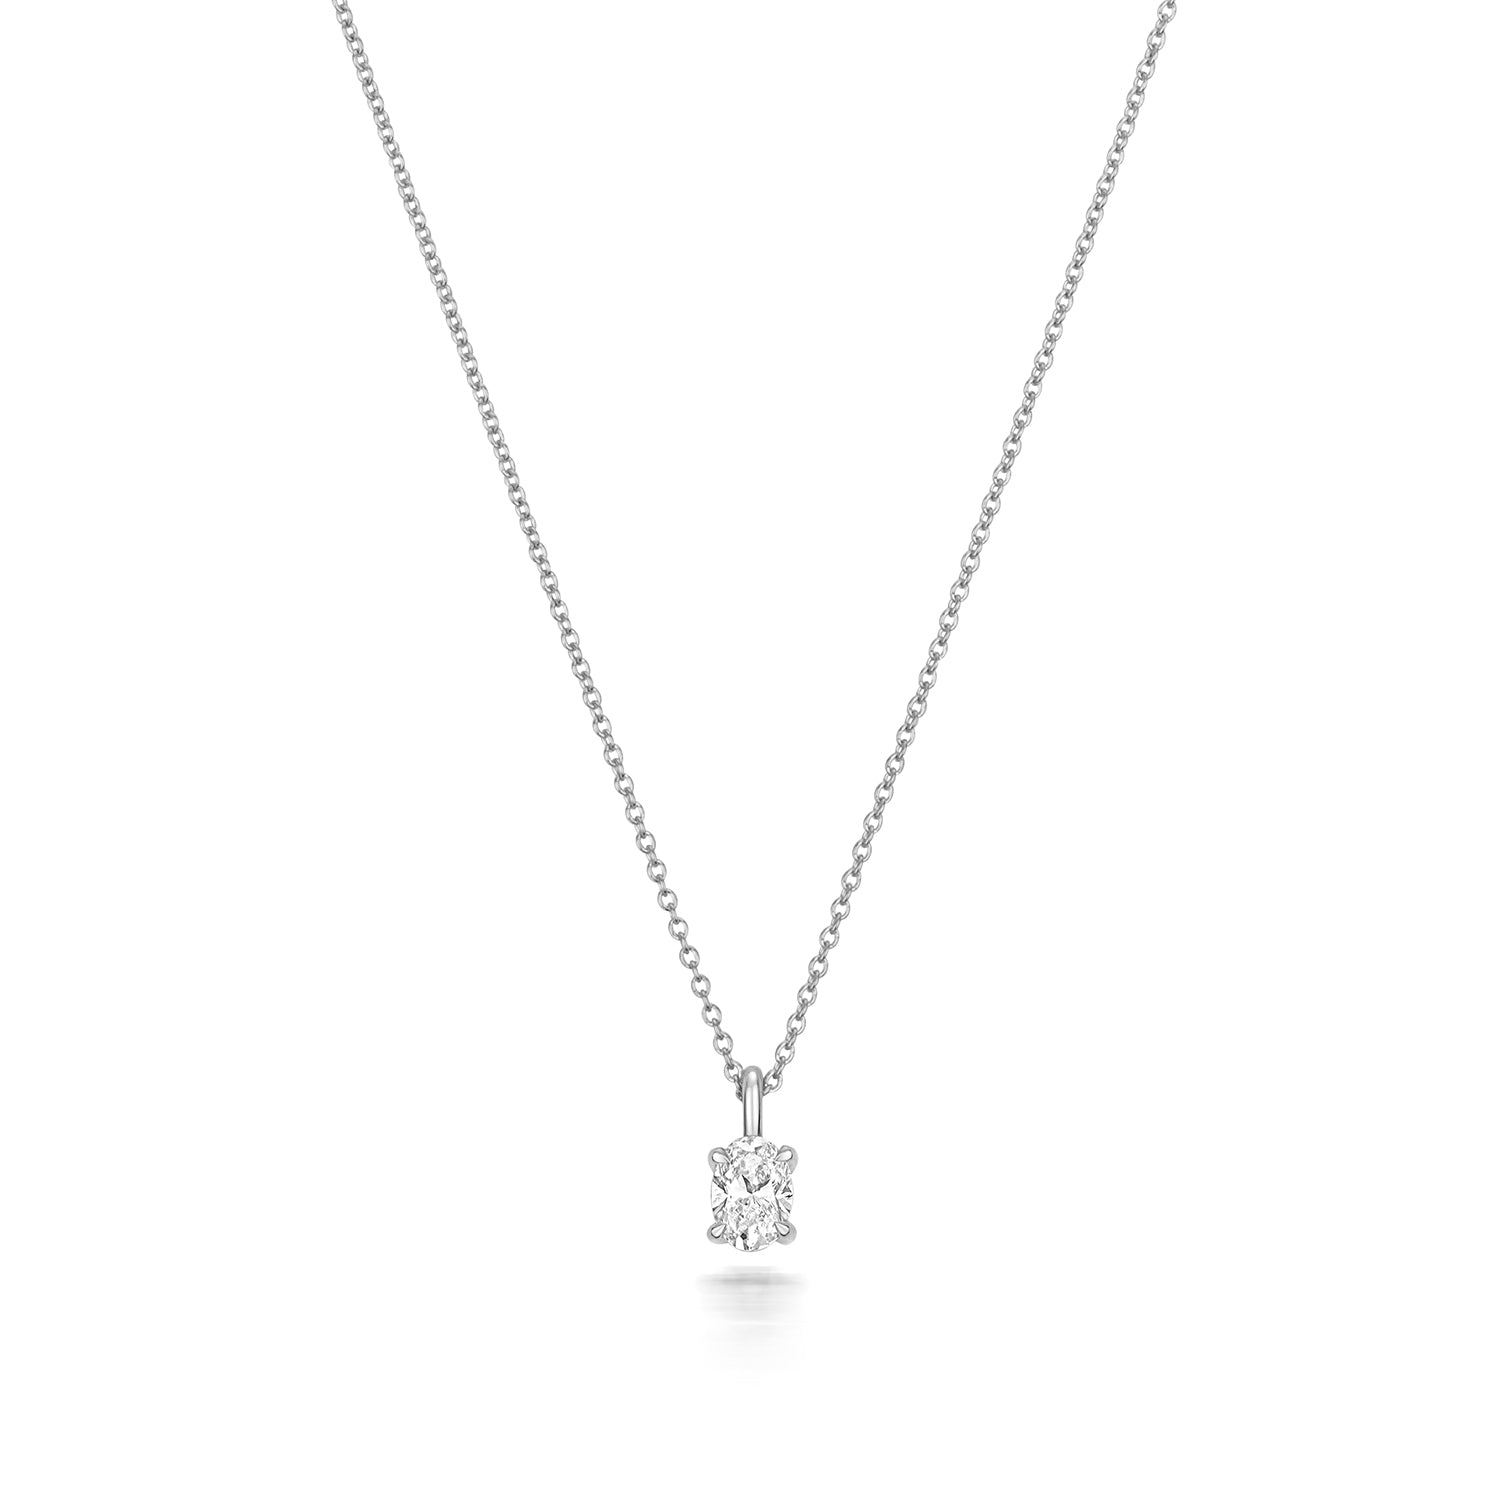 DIAMOND OVAL CUT NECKLACE IN 18CT WHITE GOLD